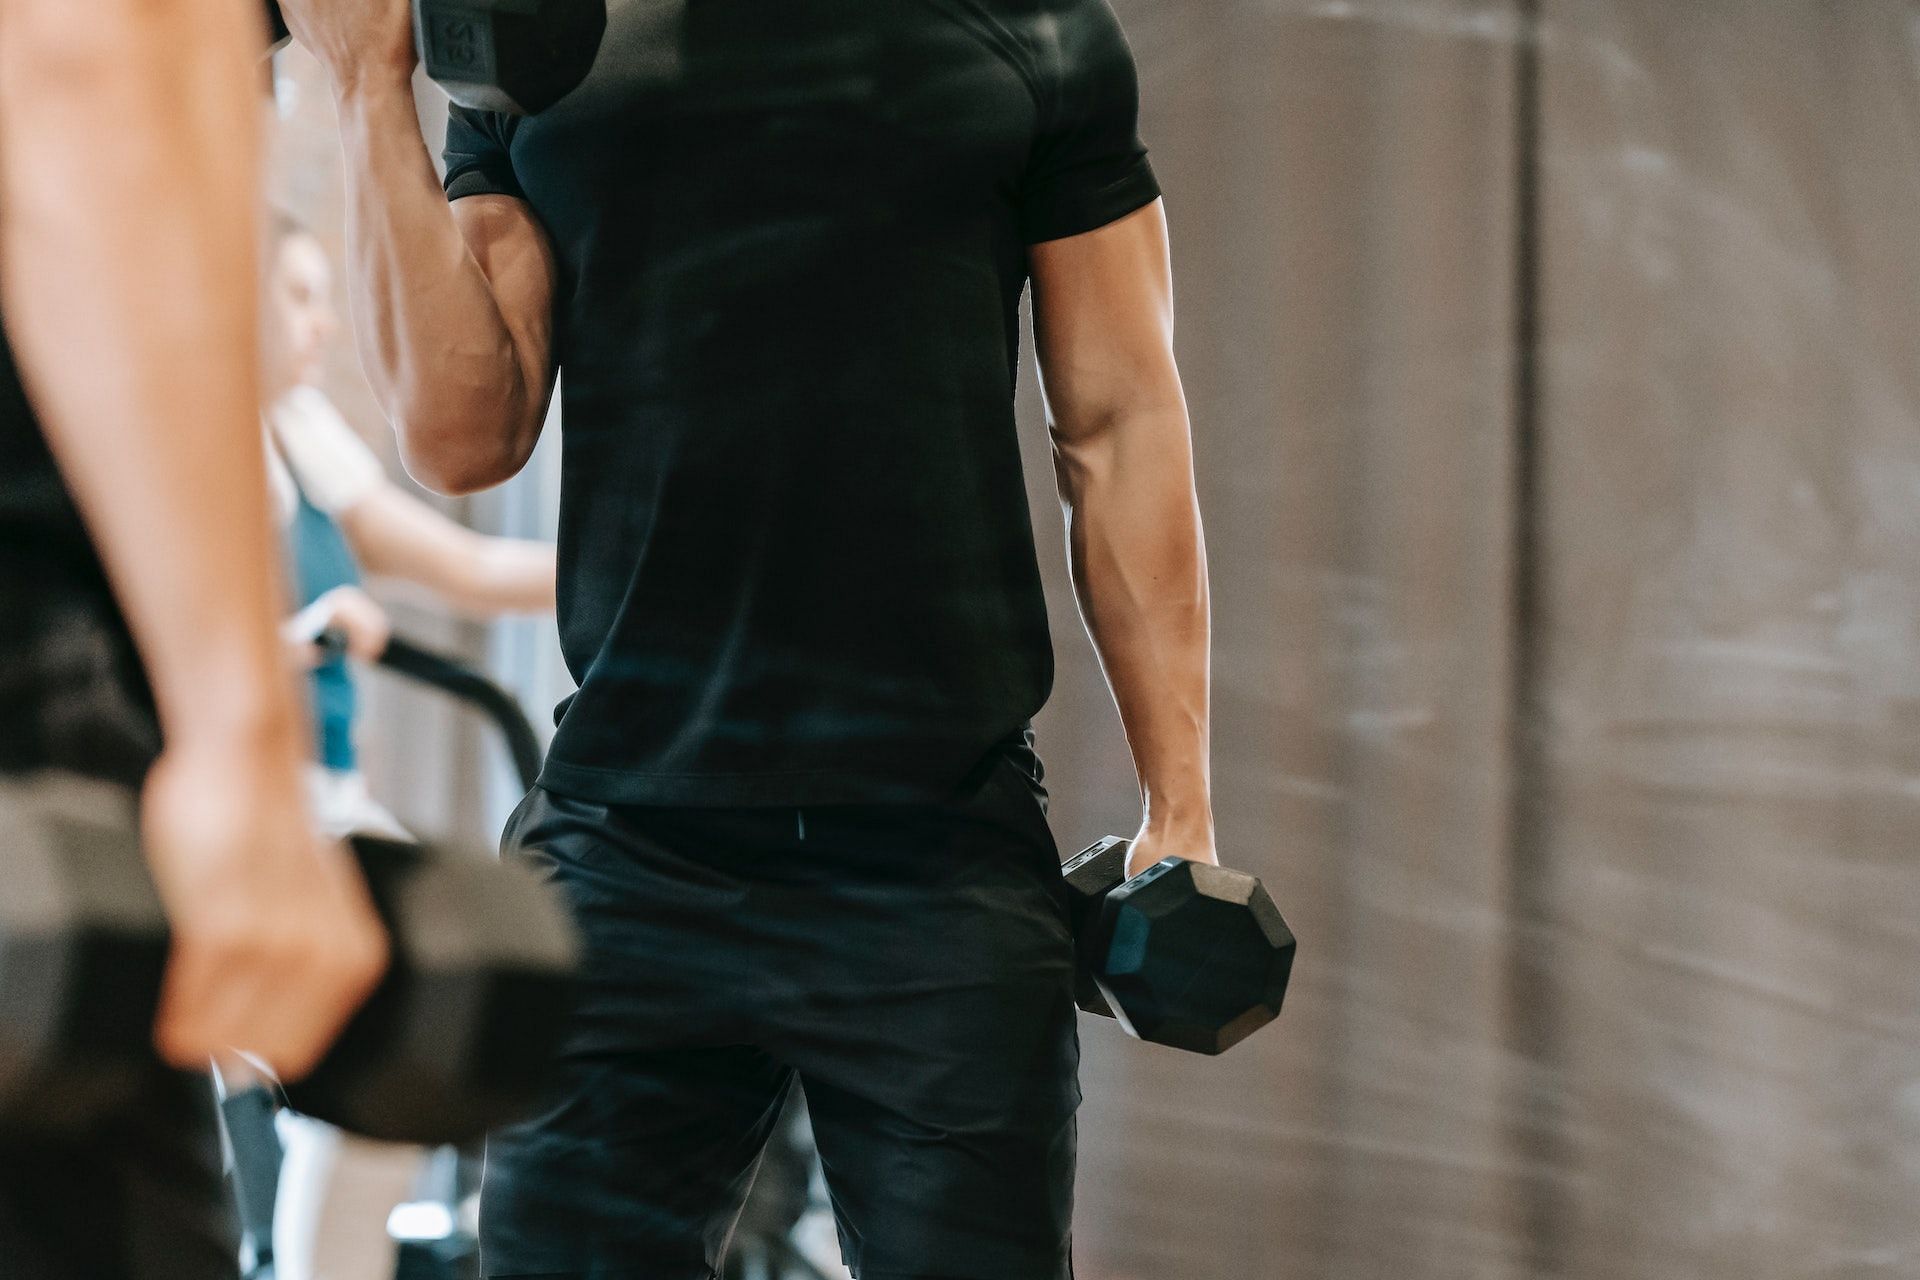 Dumbbell workouts tone the midsection. (Photo via Pexels/Andres Ayrton)